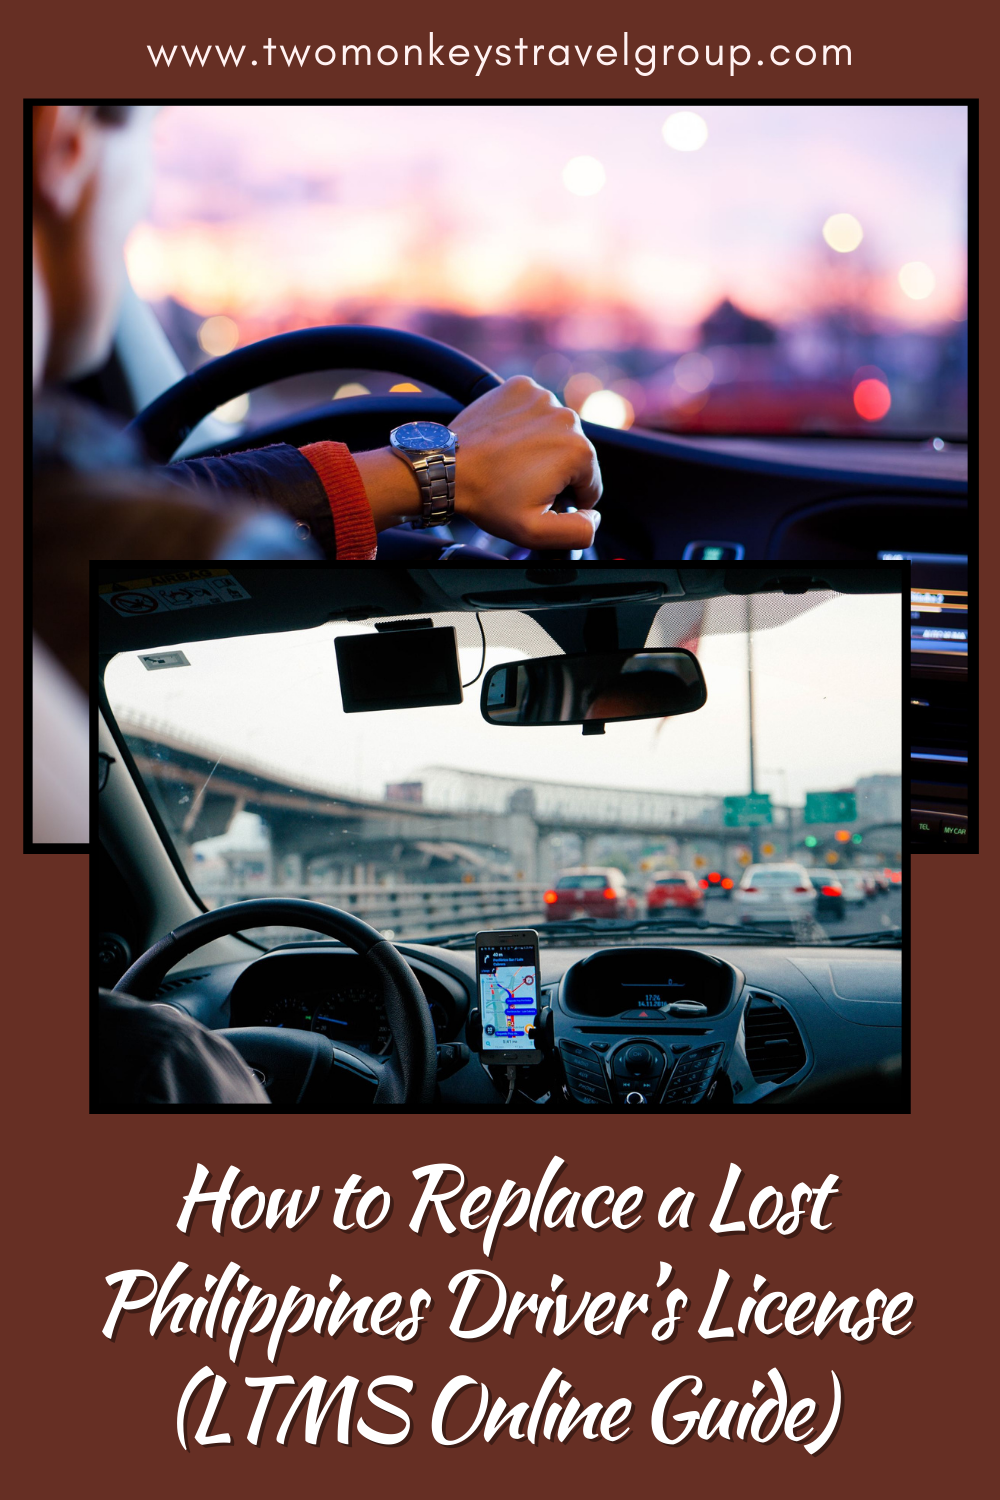 How to Replace a Lost Philippines Driver’s License (LTMS Online Guide)